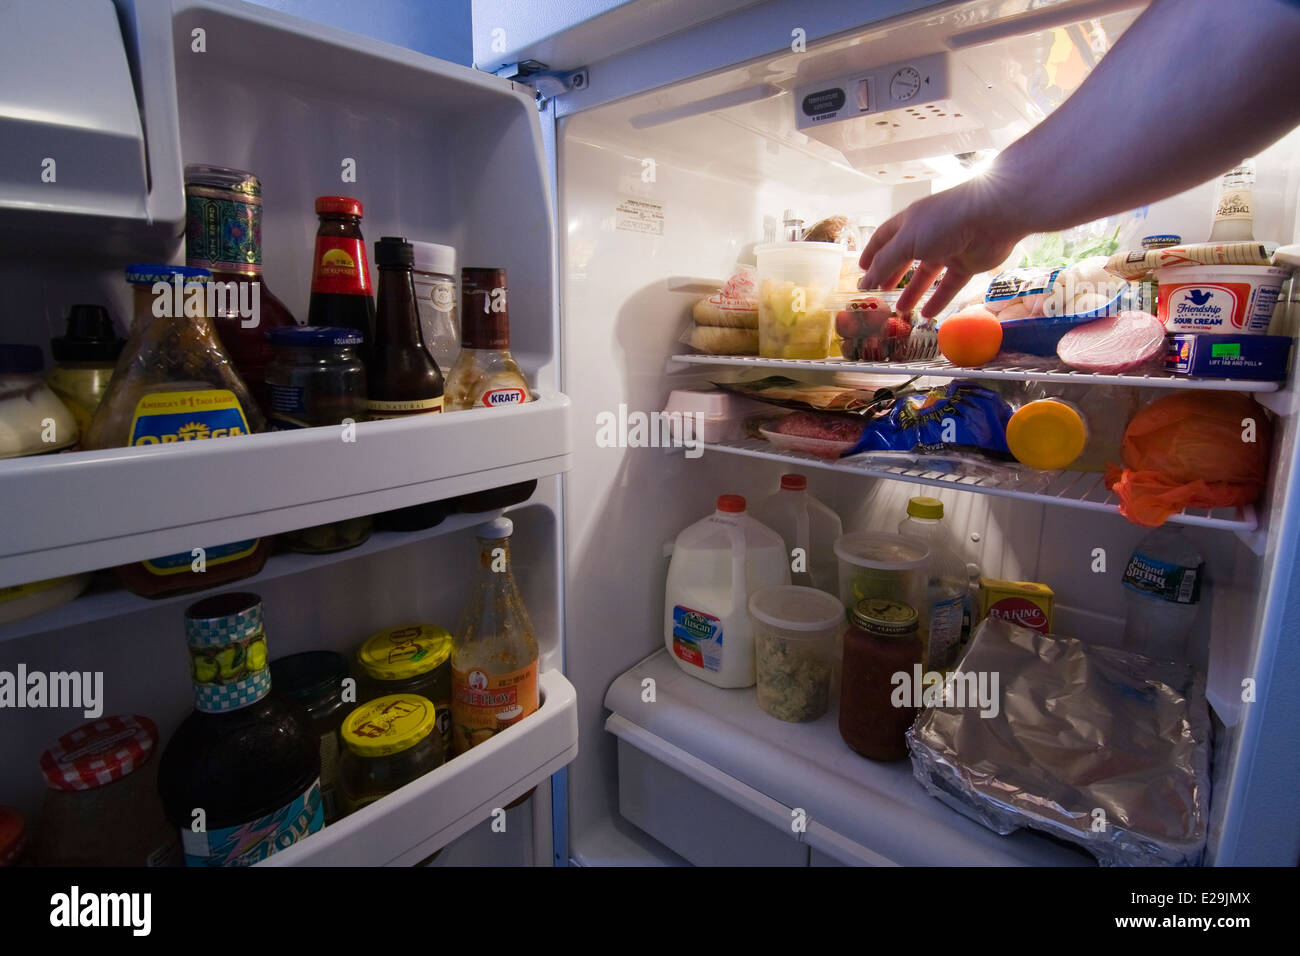 Door to a Refrigerator open with light on showing contents as a man's hand reaches for some fruit Stock Photo